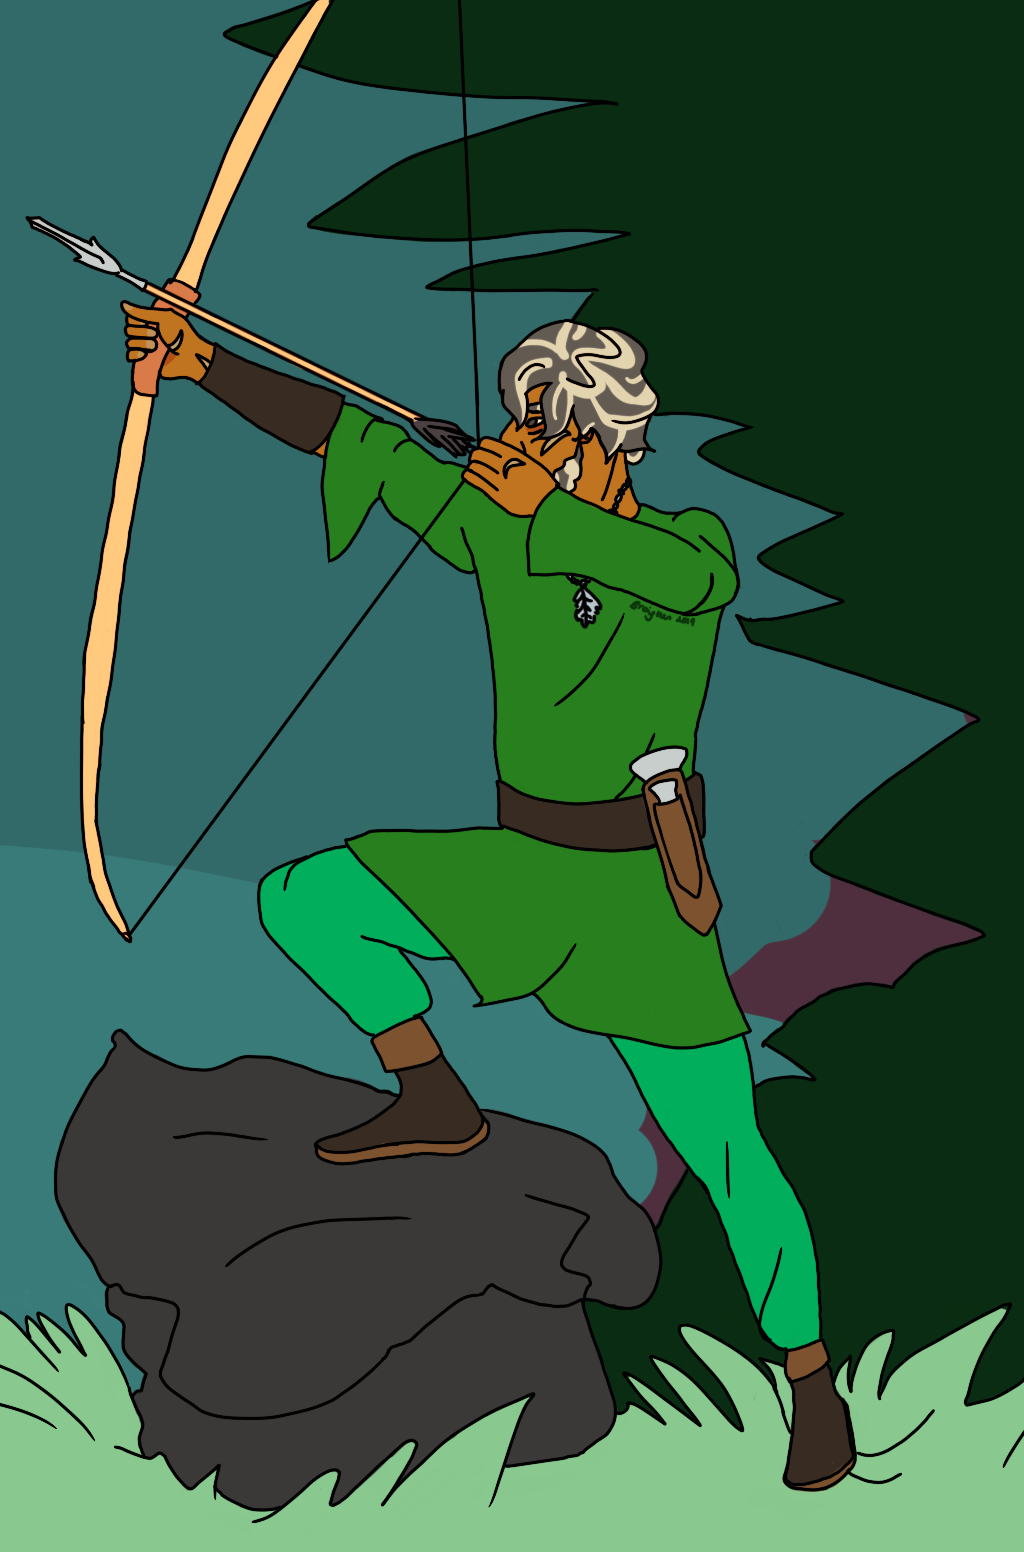 halt o'carrick practicing archery. he stands wit one foot on a rock, just past the treeline, and is aiming up into the sky. he is not wearing his cloak, instead green tunic, trousers, his oakleaf necklace, and his belt with two knives on it. his hair and beard are salt-and-prepper grey, and there are scars on his face and hands.